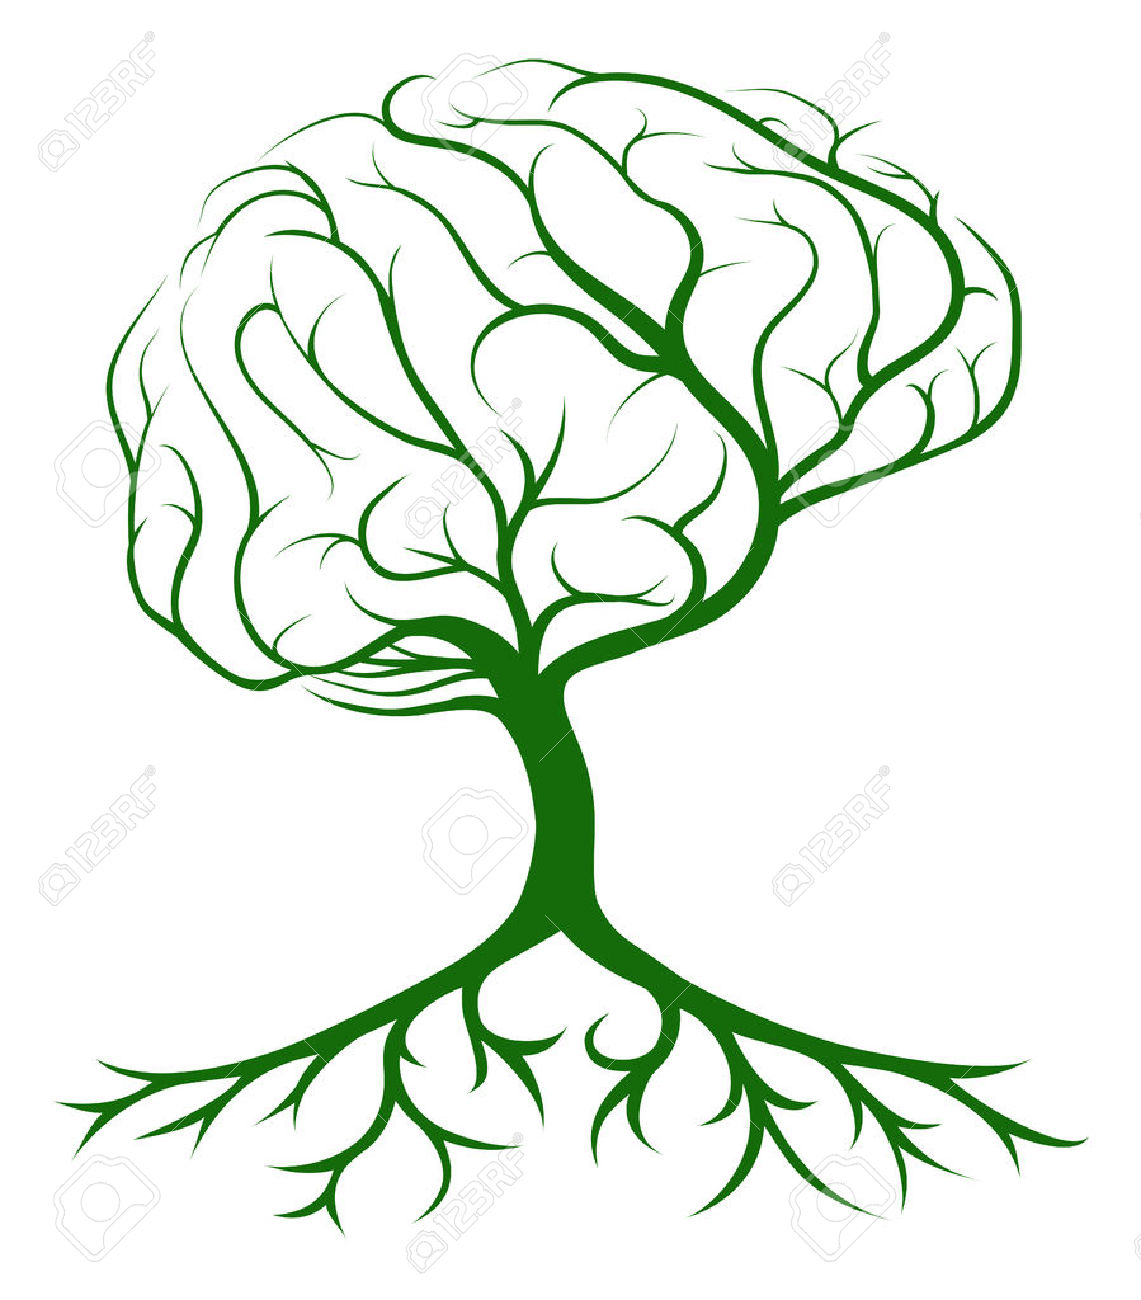 Brain Tree Concept Of A Tree Growing In The Shape Of A Human.